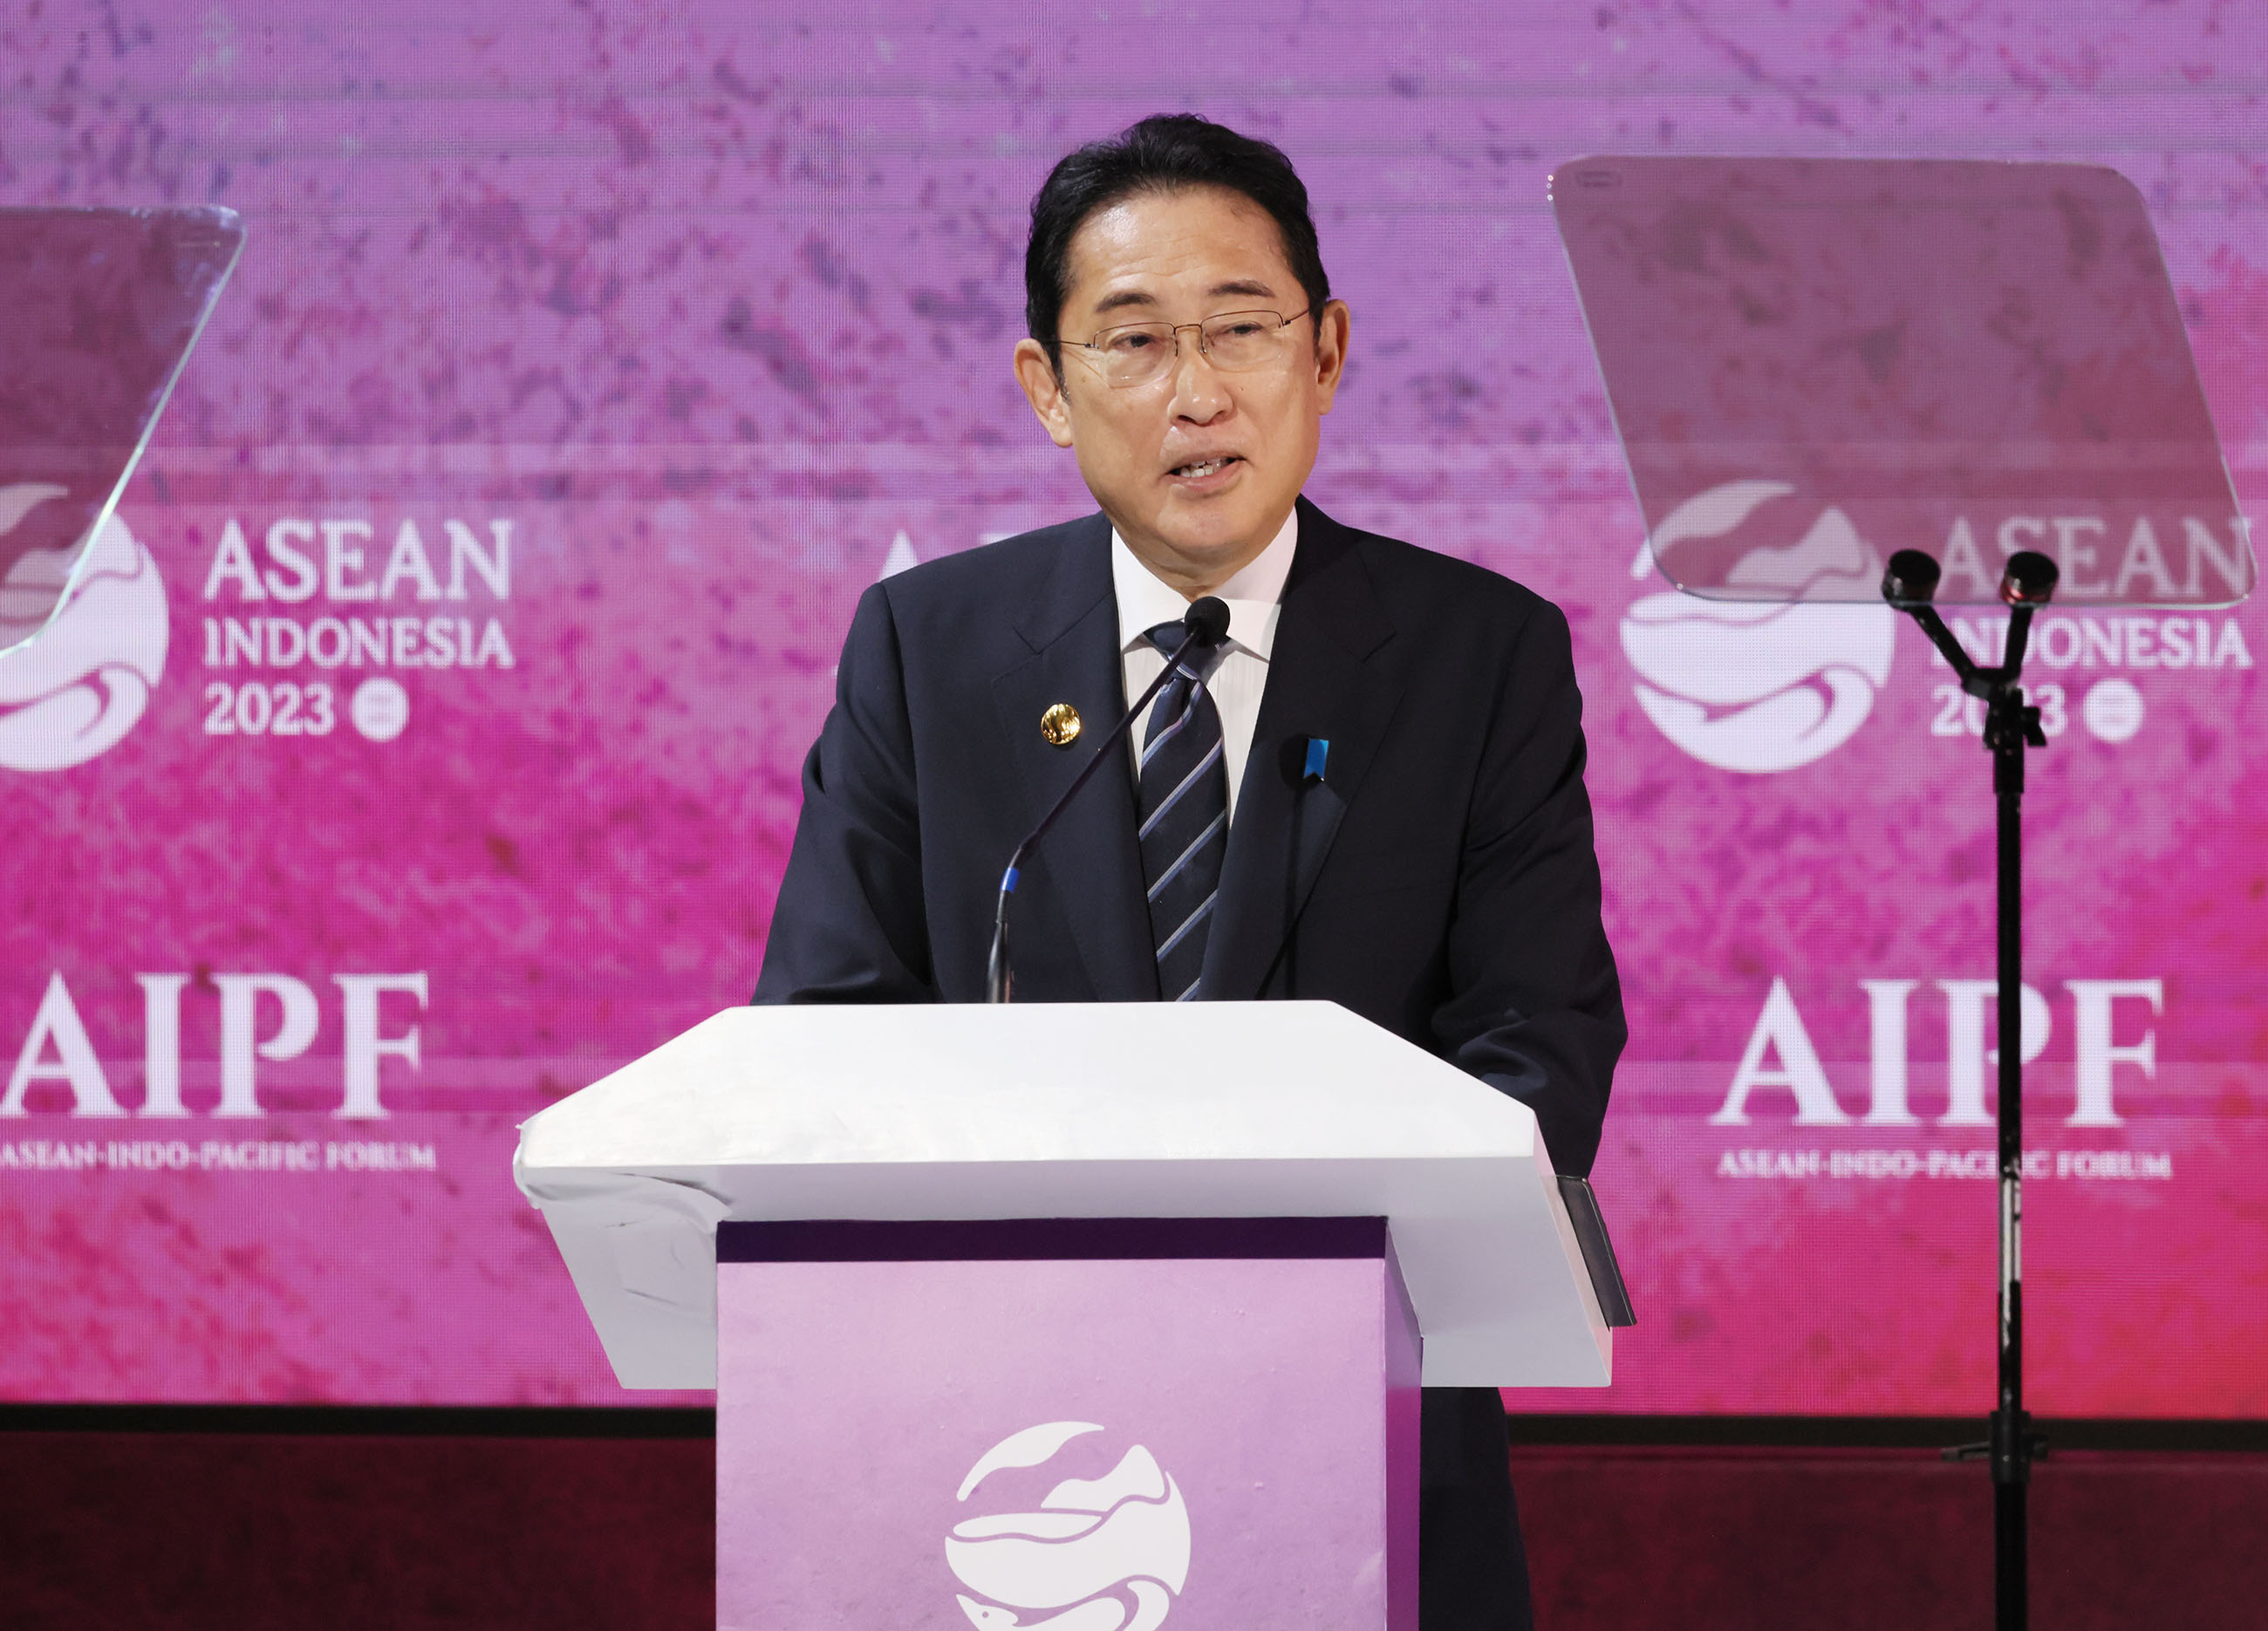 Prime Minister Kishida delivering a speech at the ASEAN-Indo-Pacific Forum (1)